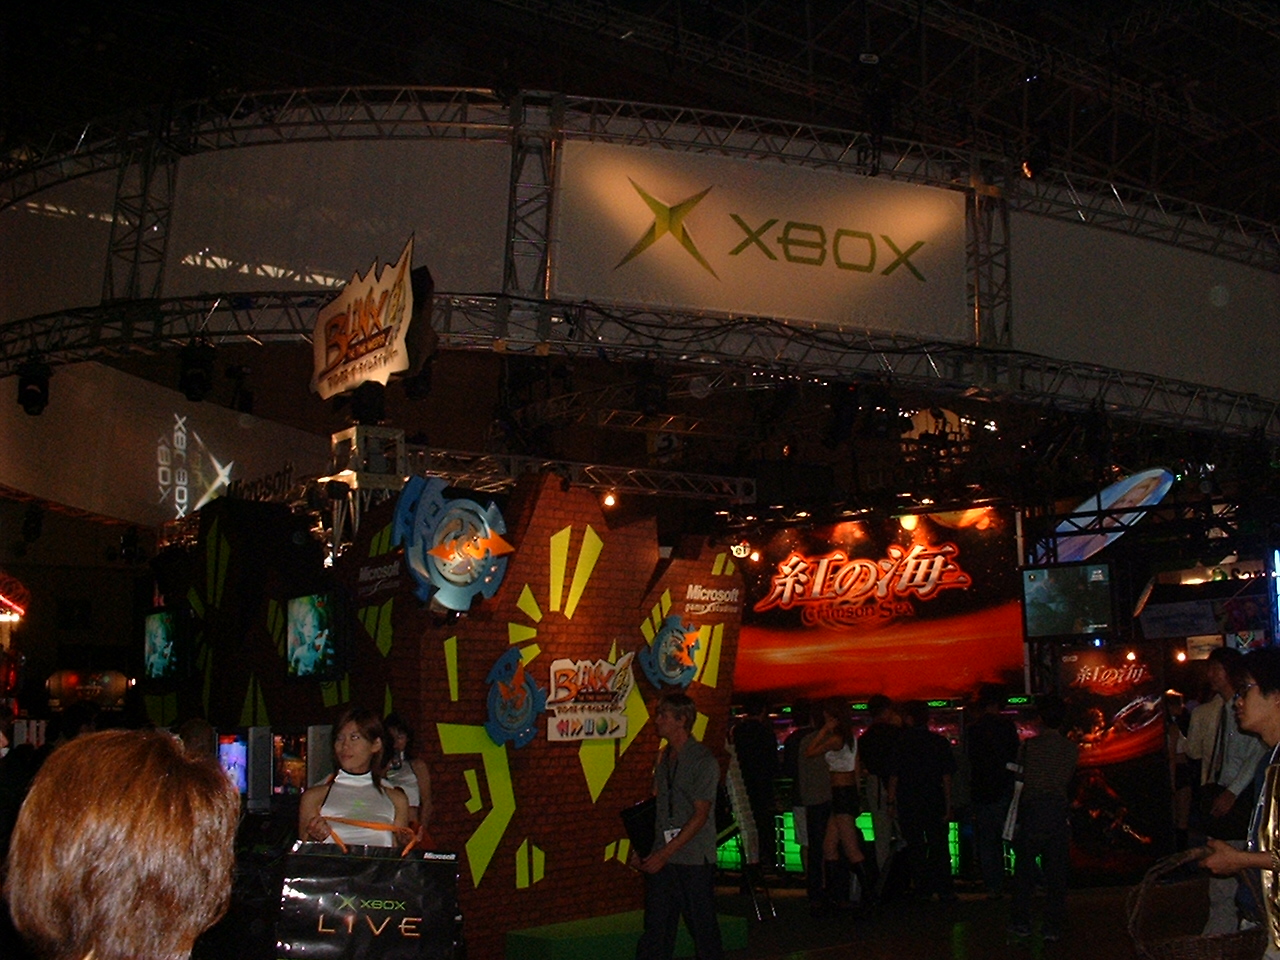 a booth with the xbox logo above the entrance